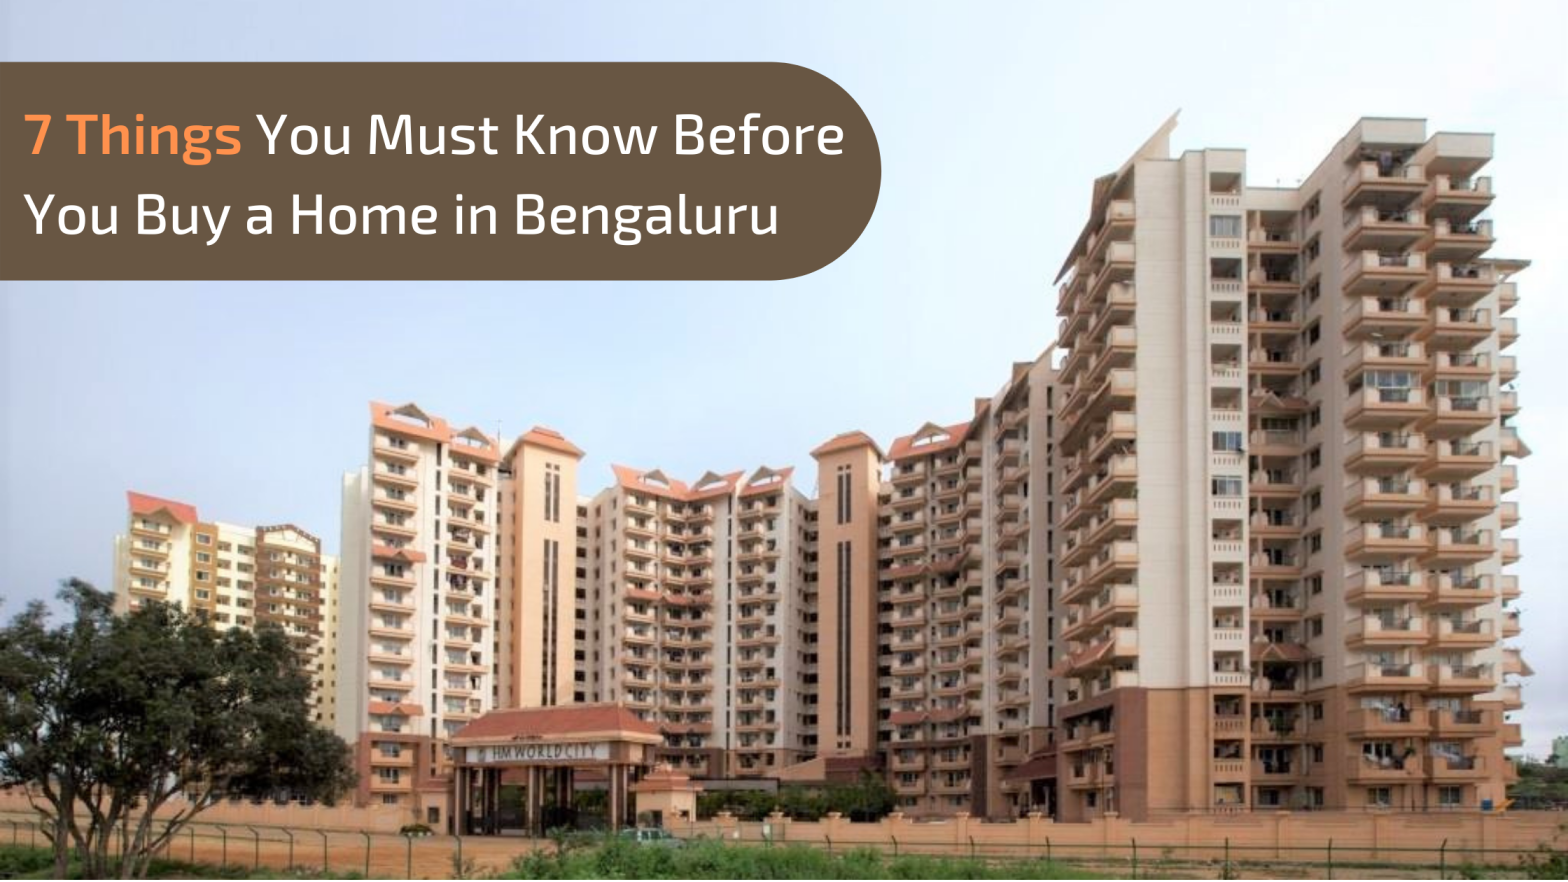 7 Things You Must Know Before You Buy a Home in Bengaluru